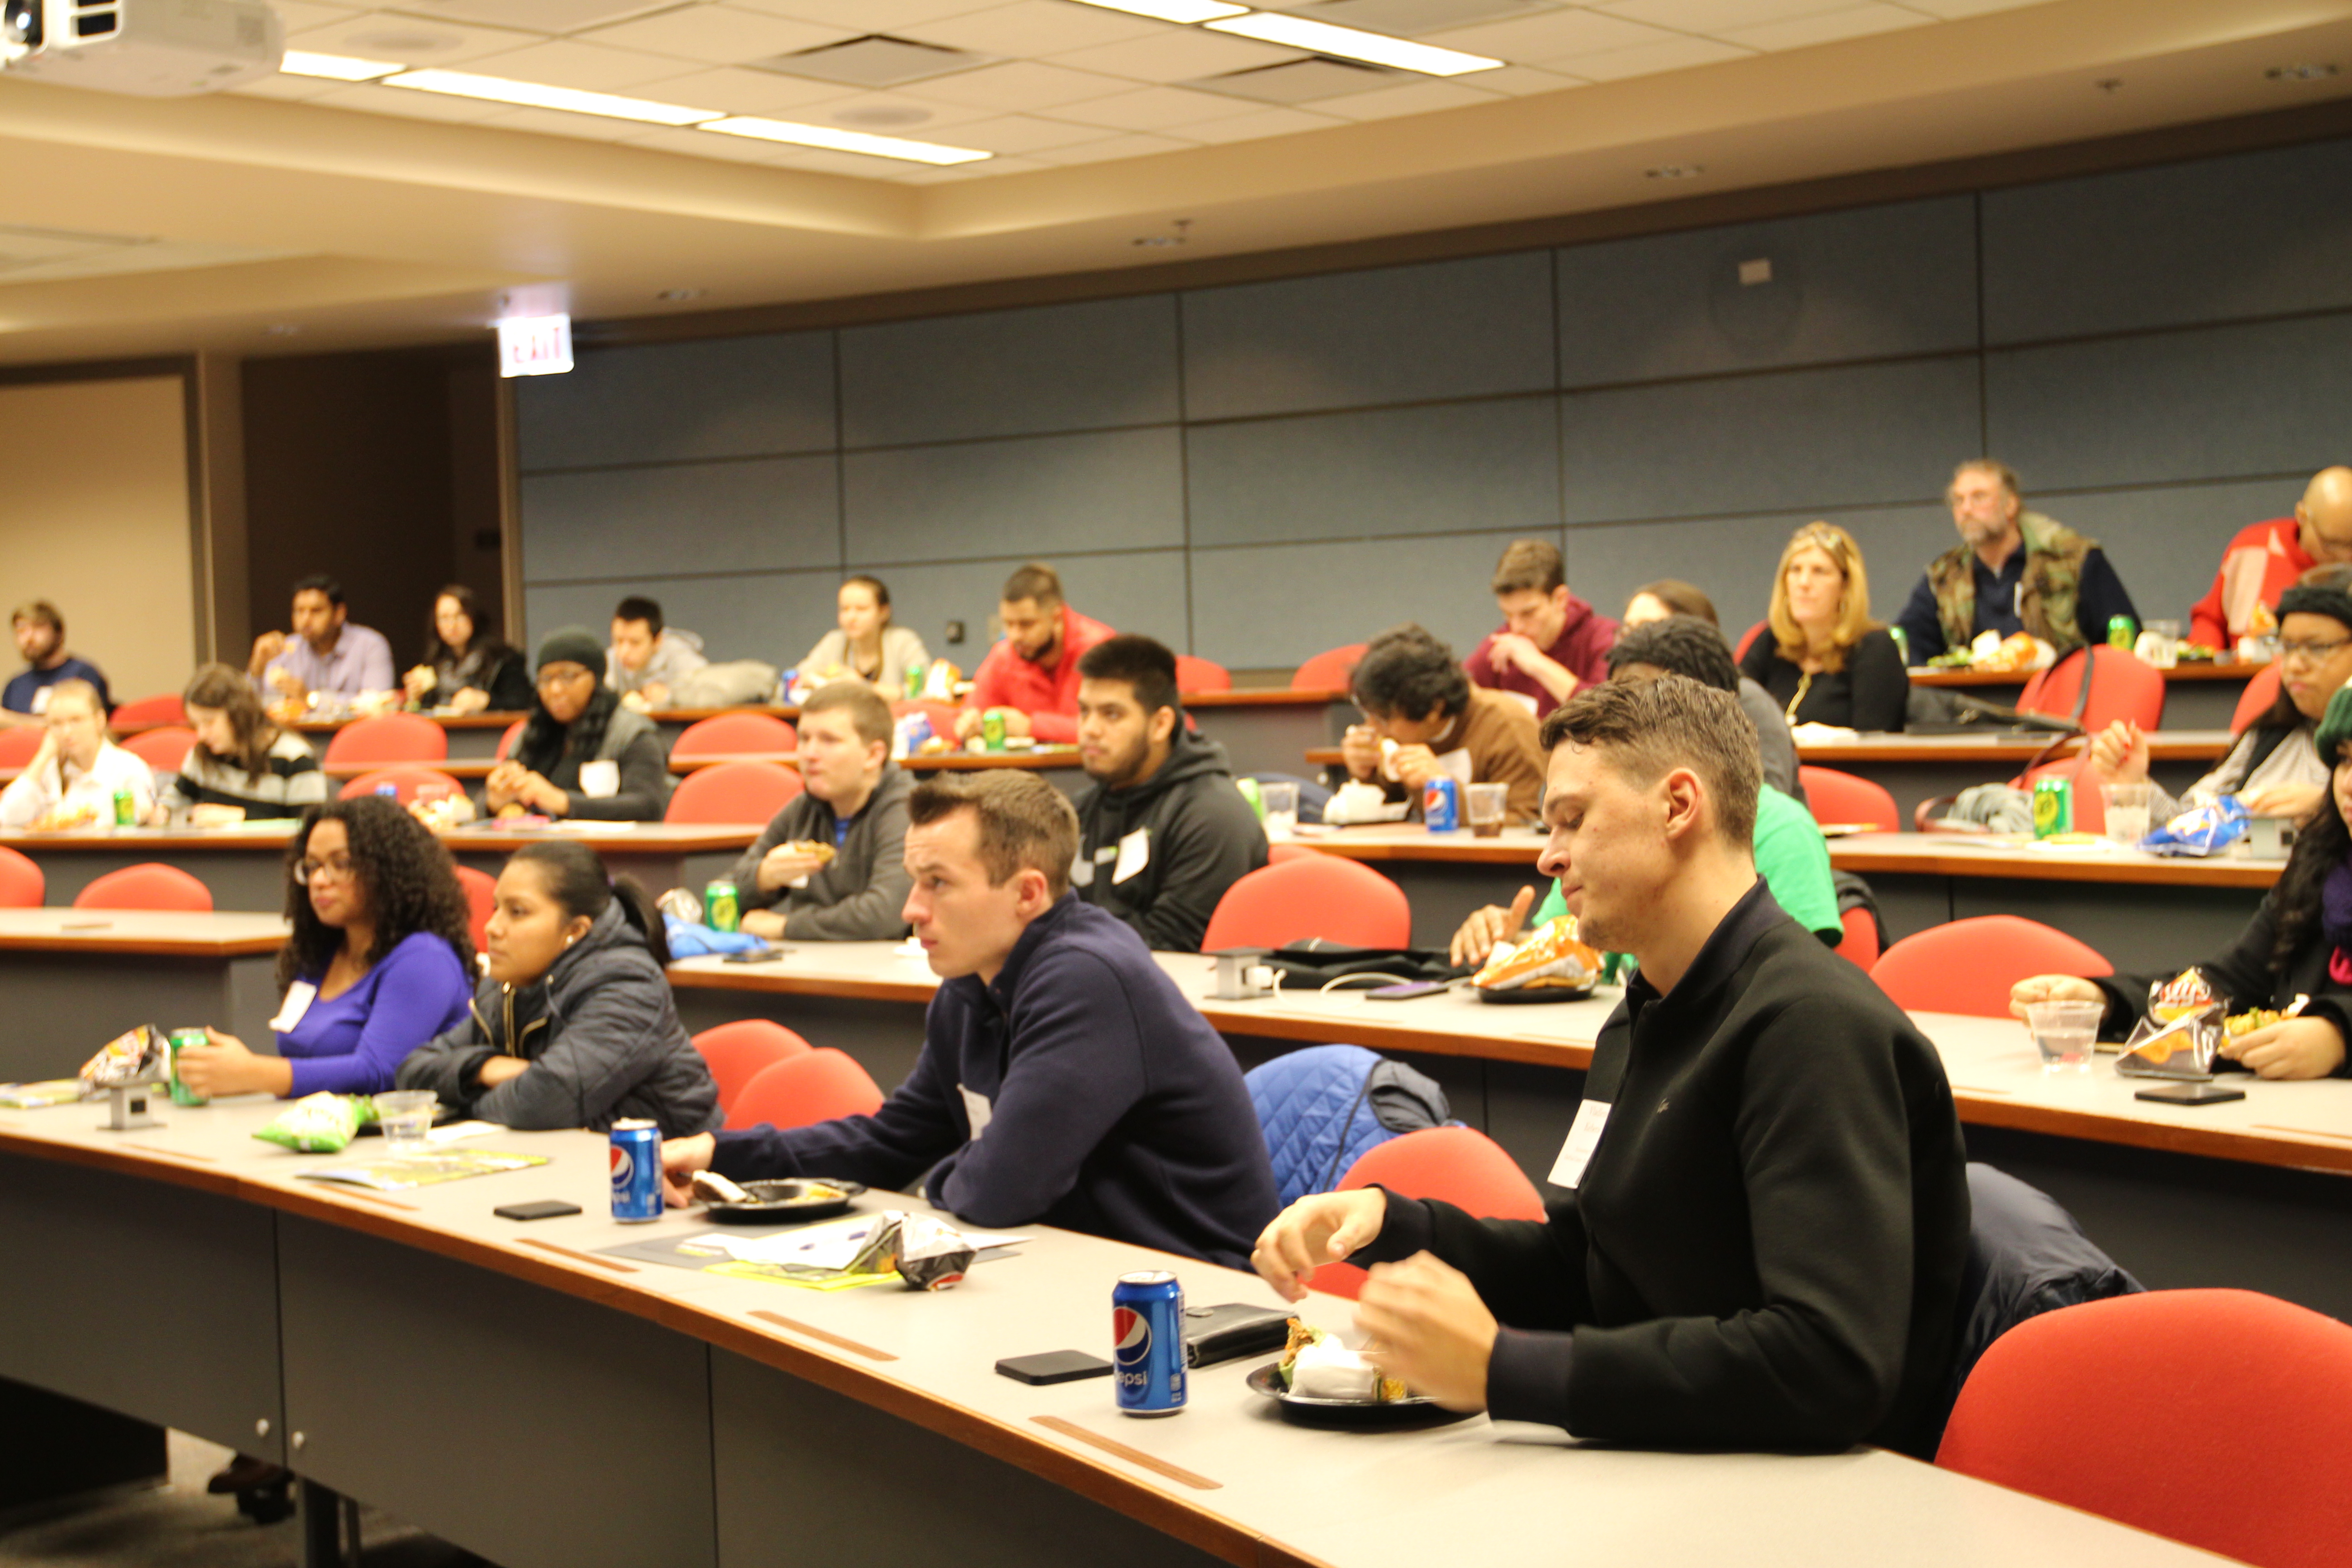 Prospective students attend a session at the 2018 DePaul Transfer Experience Event.